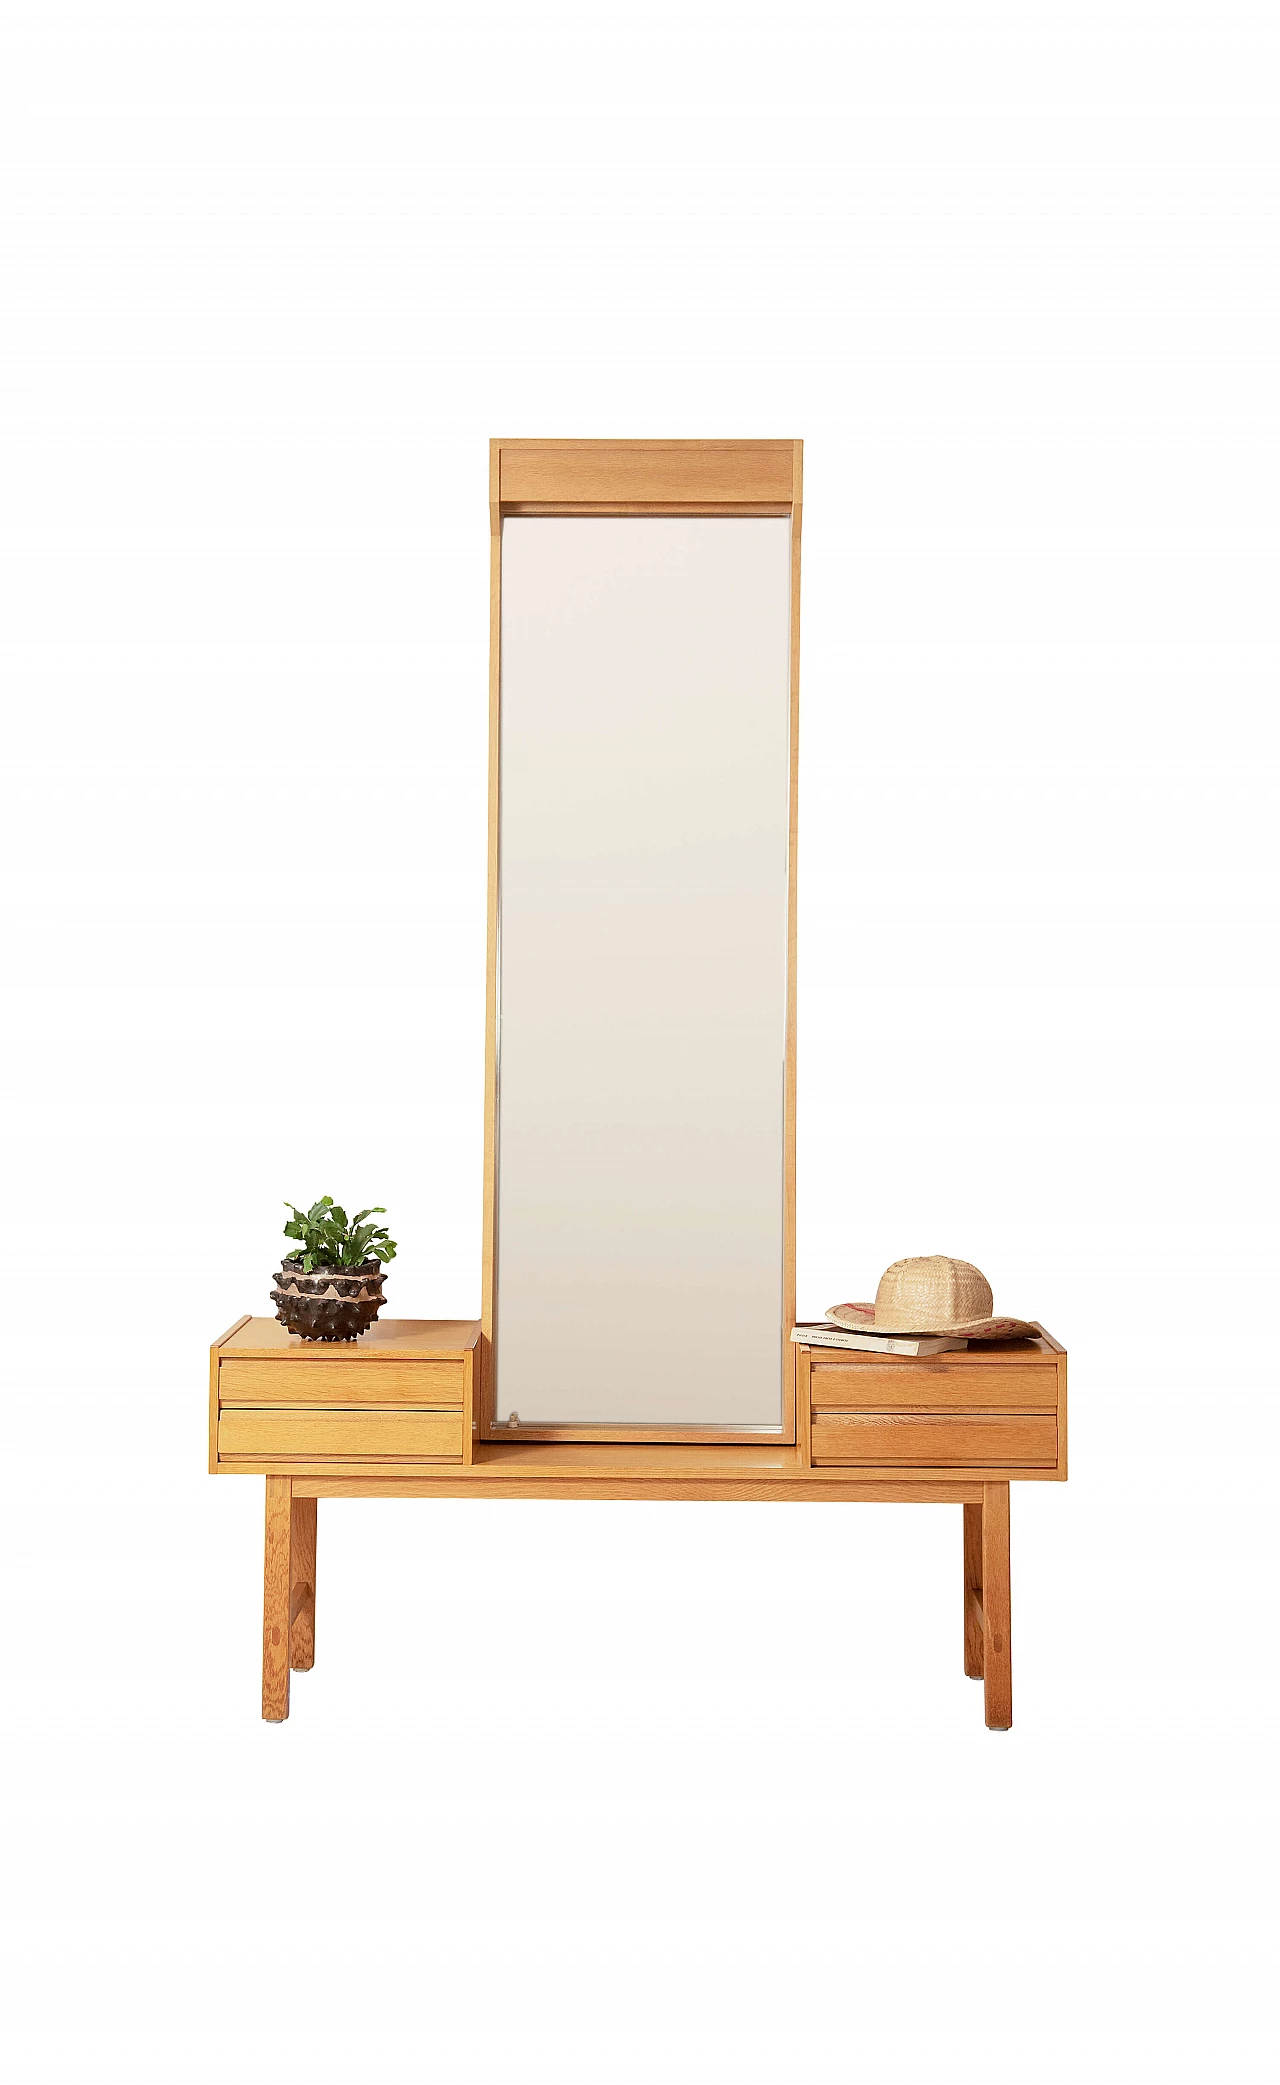 Entrance small table with oak wood and mirror 1144336